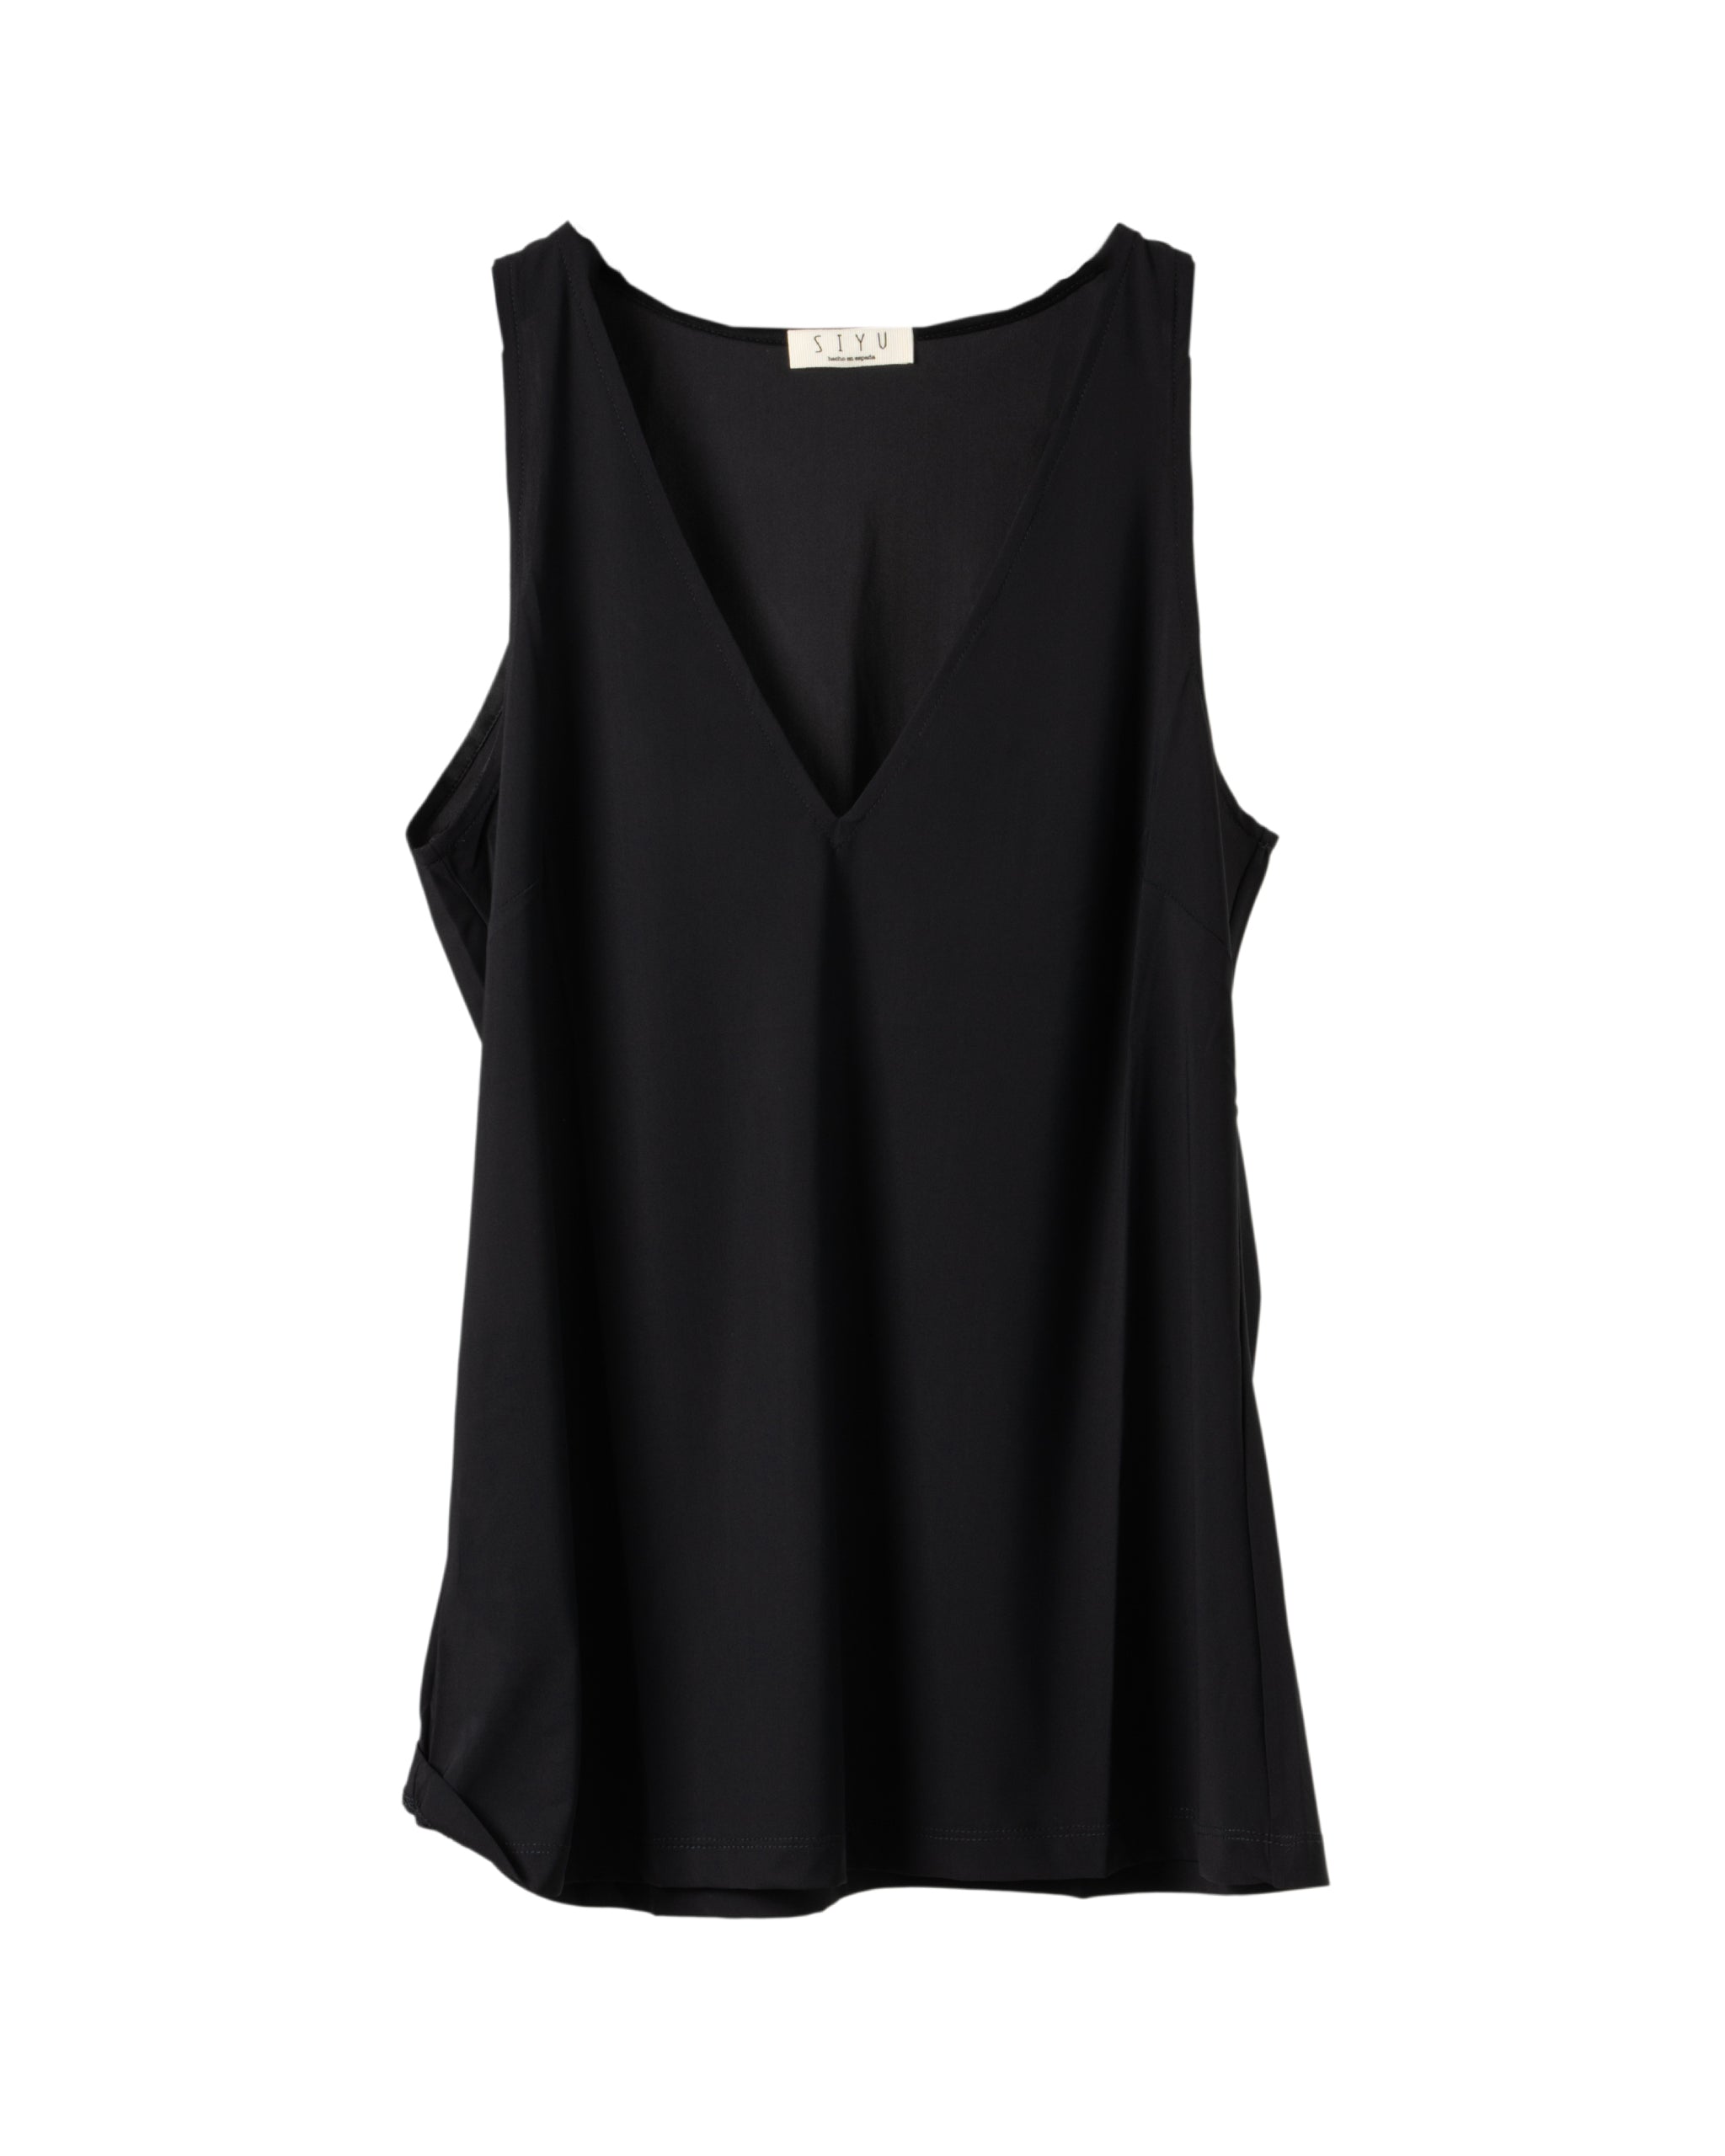 SLEEVELESS SOLID COLOR V-TOP